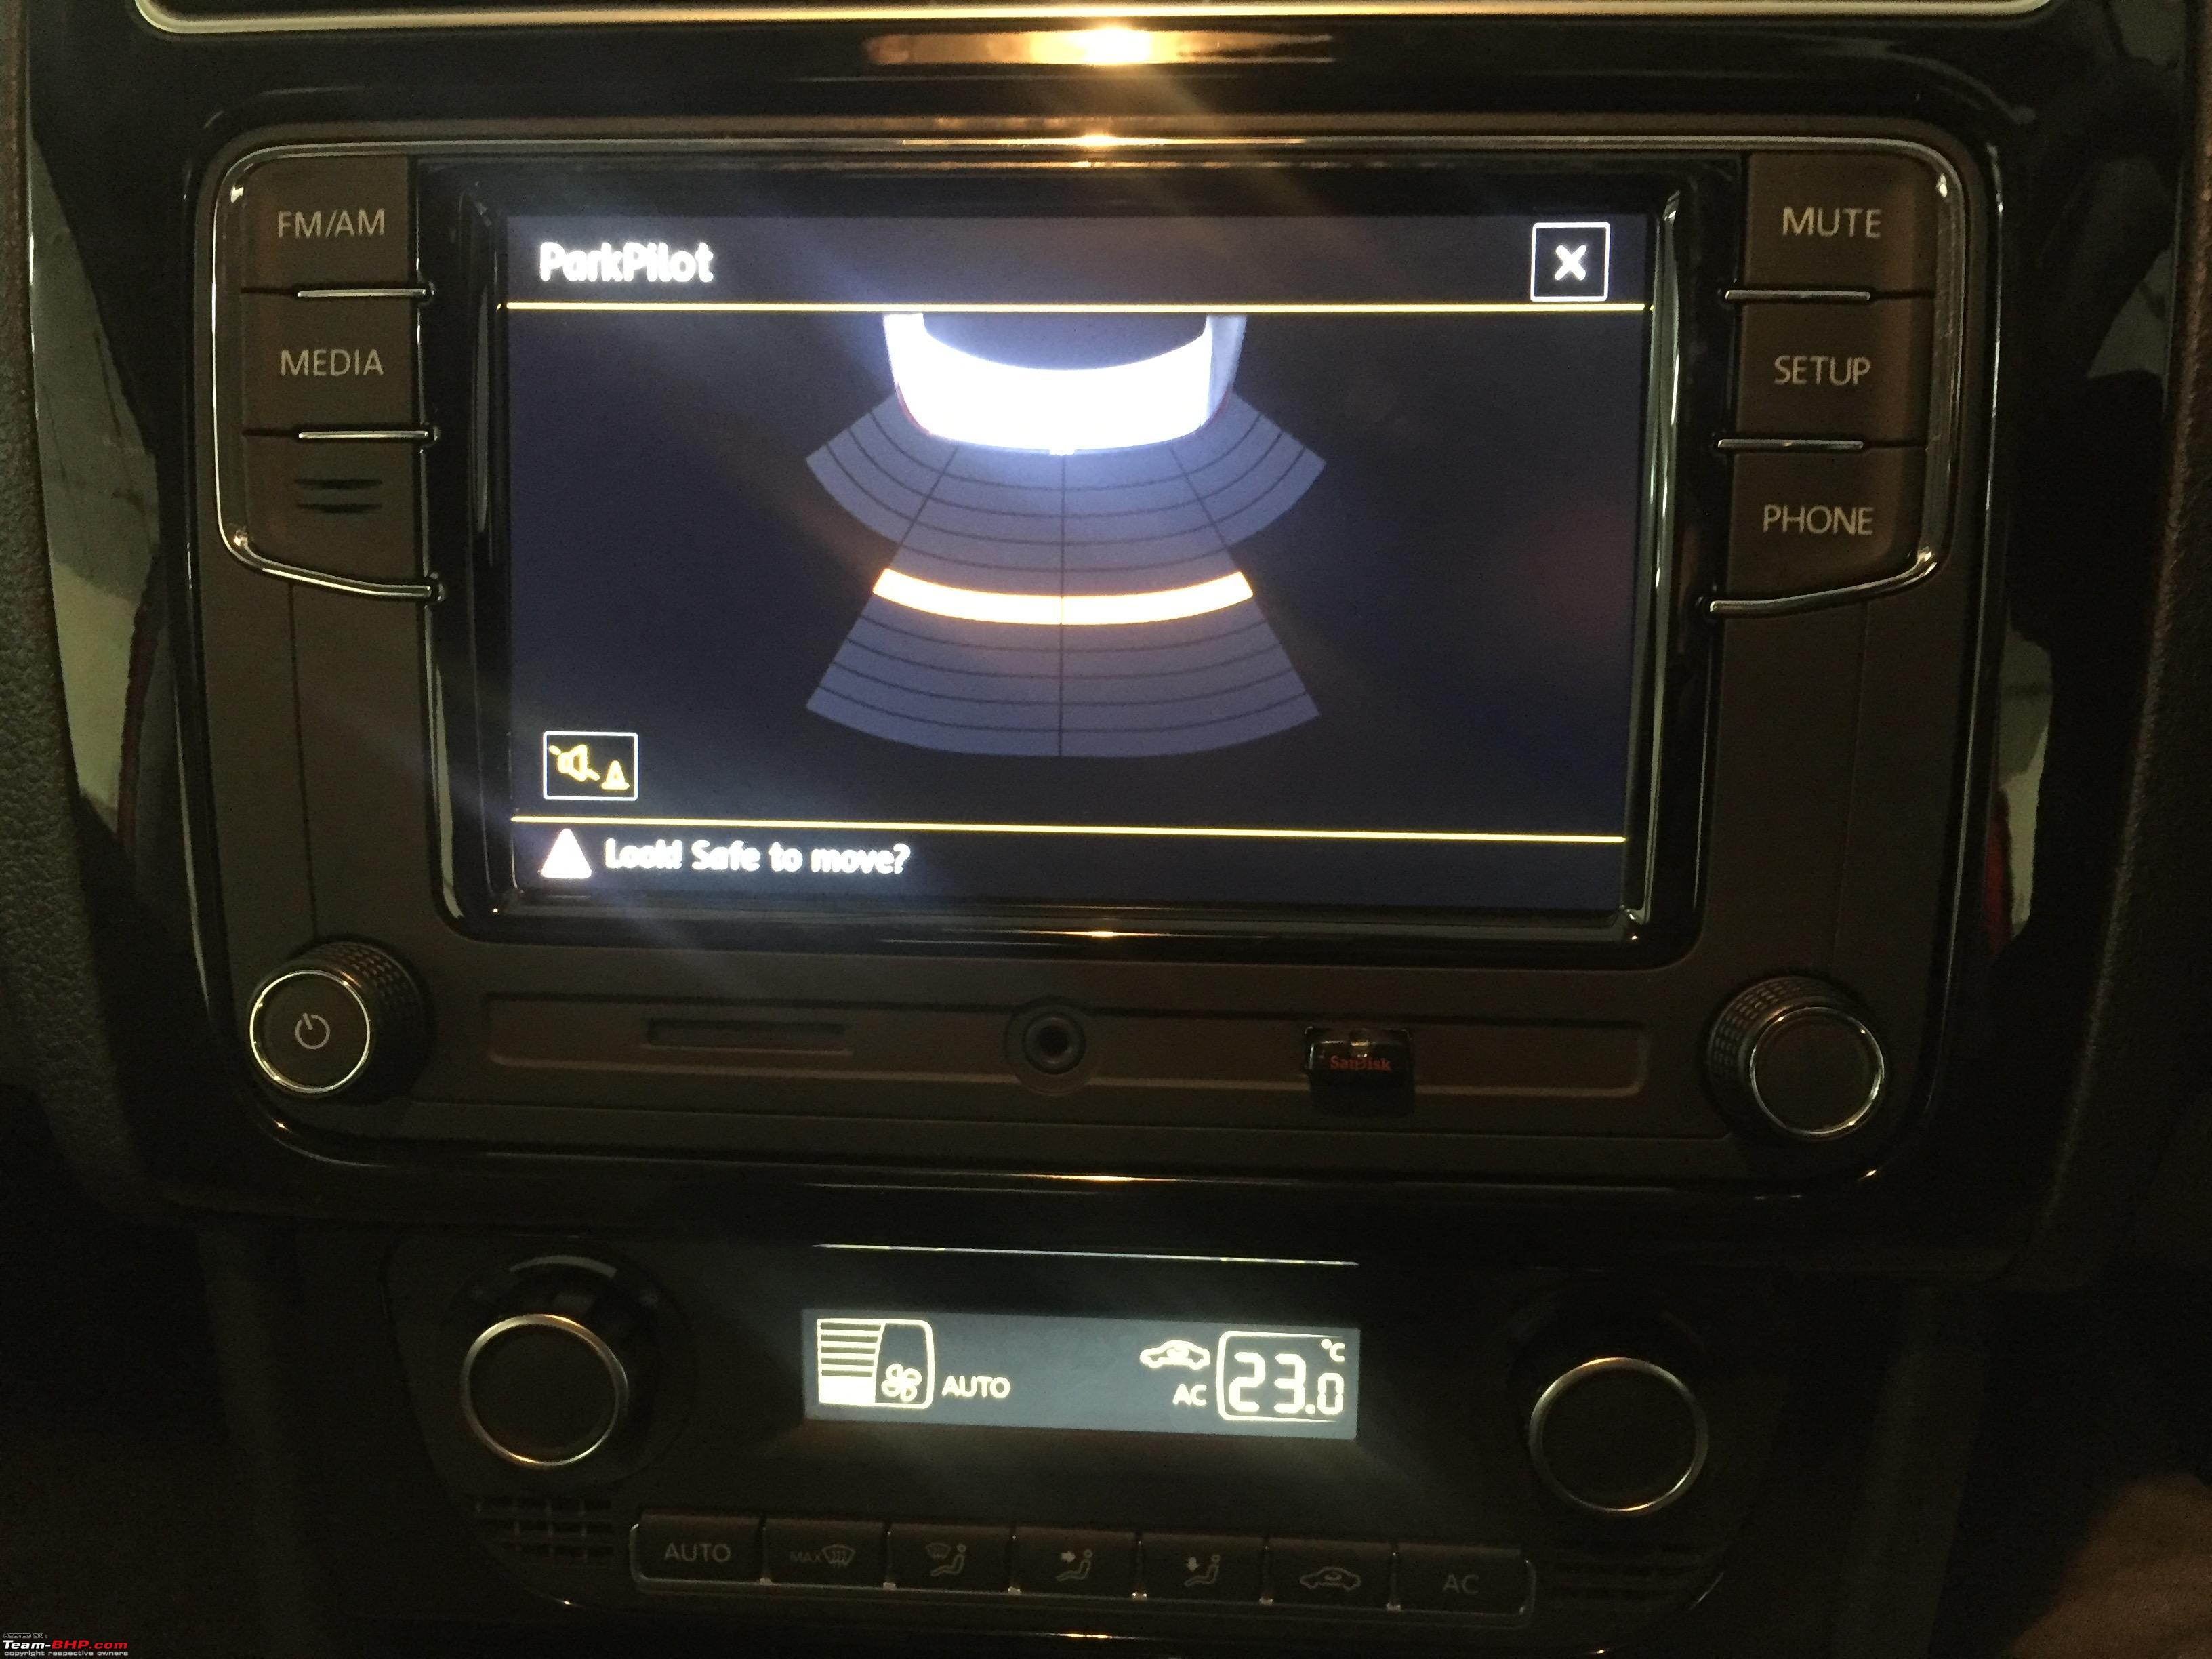 DIY: Installing OPS (Optical Parking System) in the VW Polo / Vento -  Team-BHP